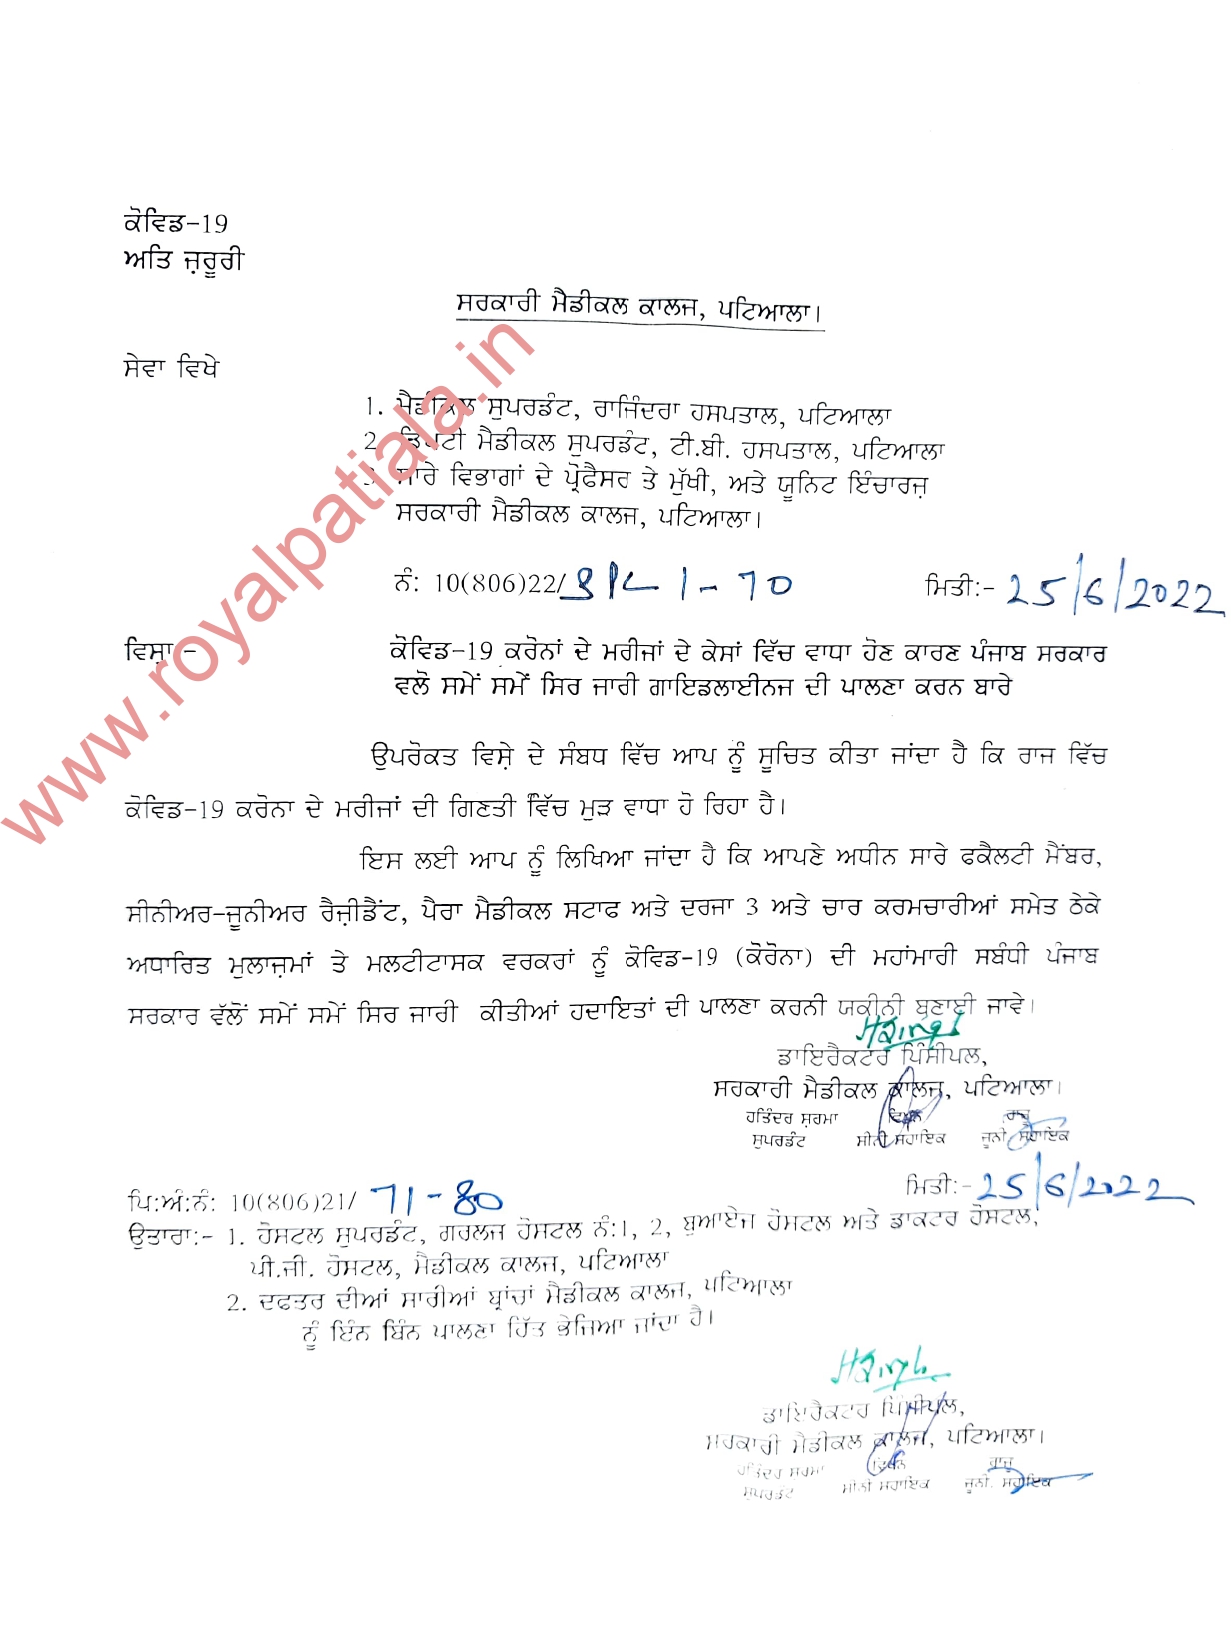 Corona cases increasing-Director Govt Medical College Patiala issues new instructions